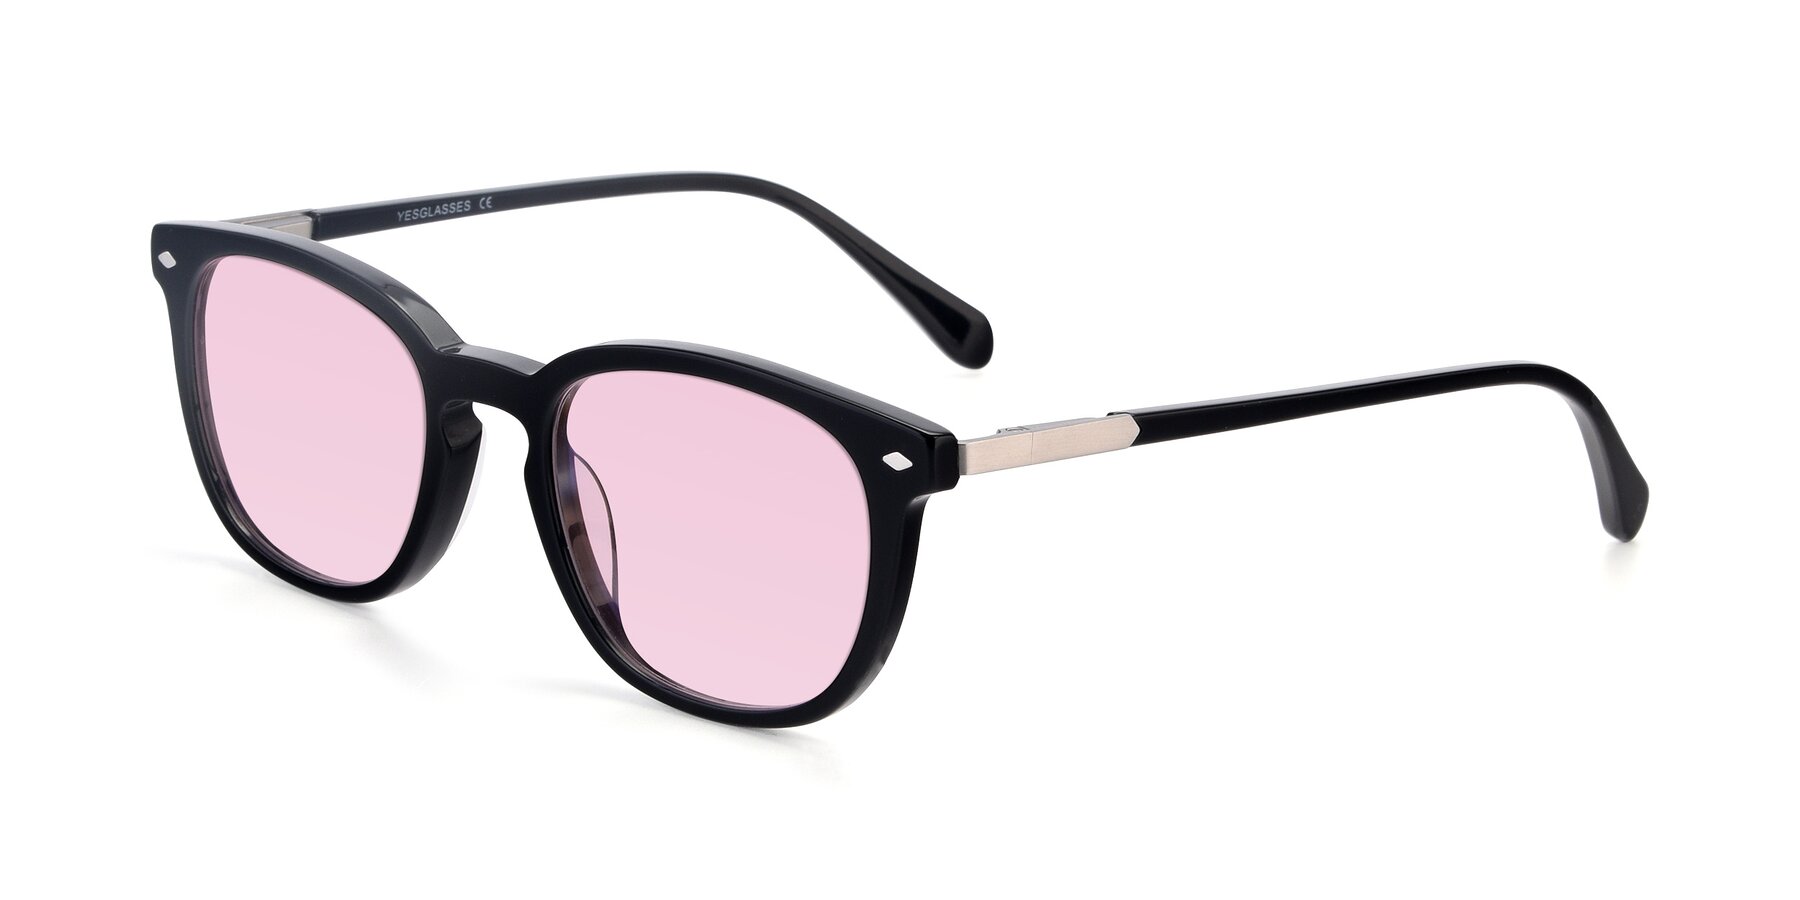 Angle of 17578 in Black with Light Pink Tinted Lenses